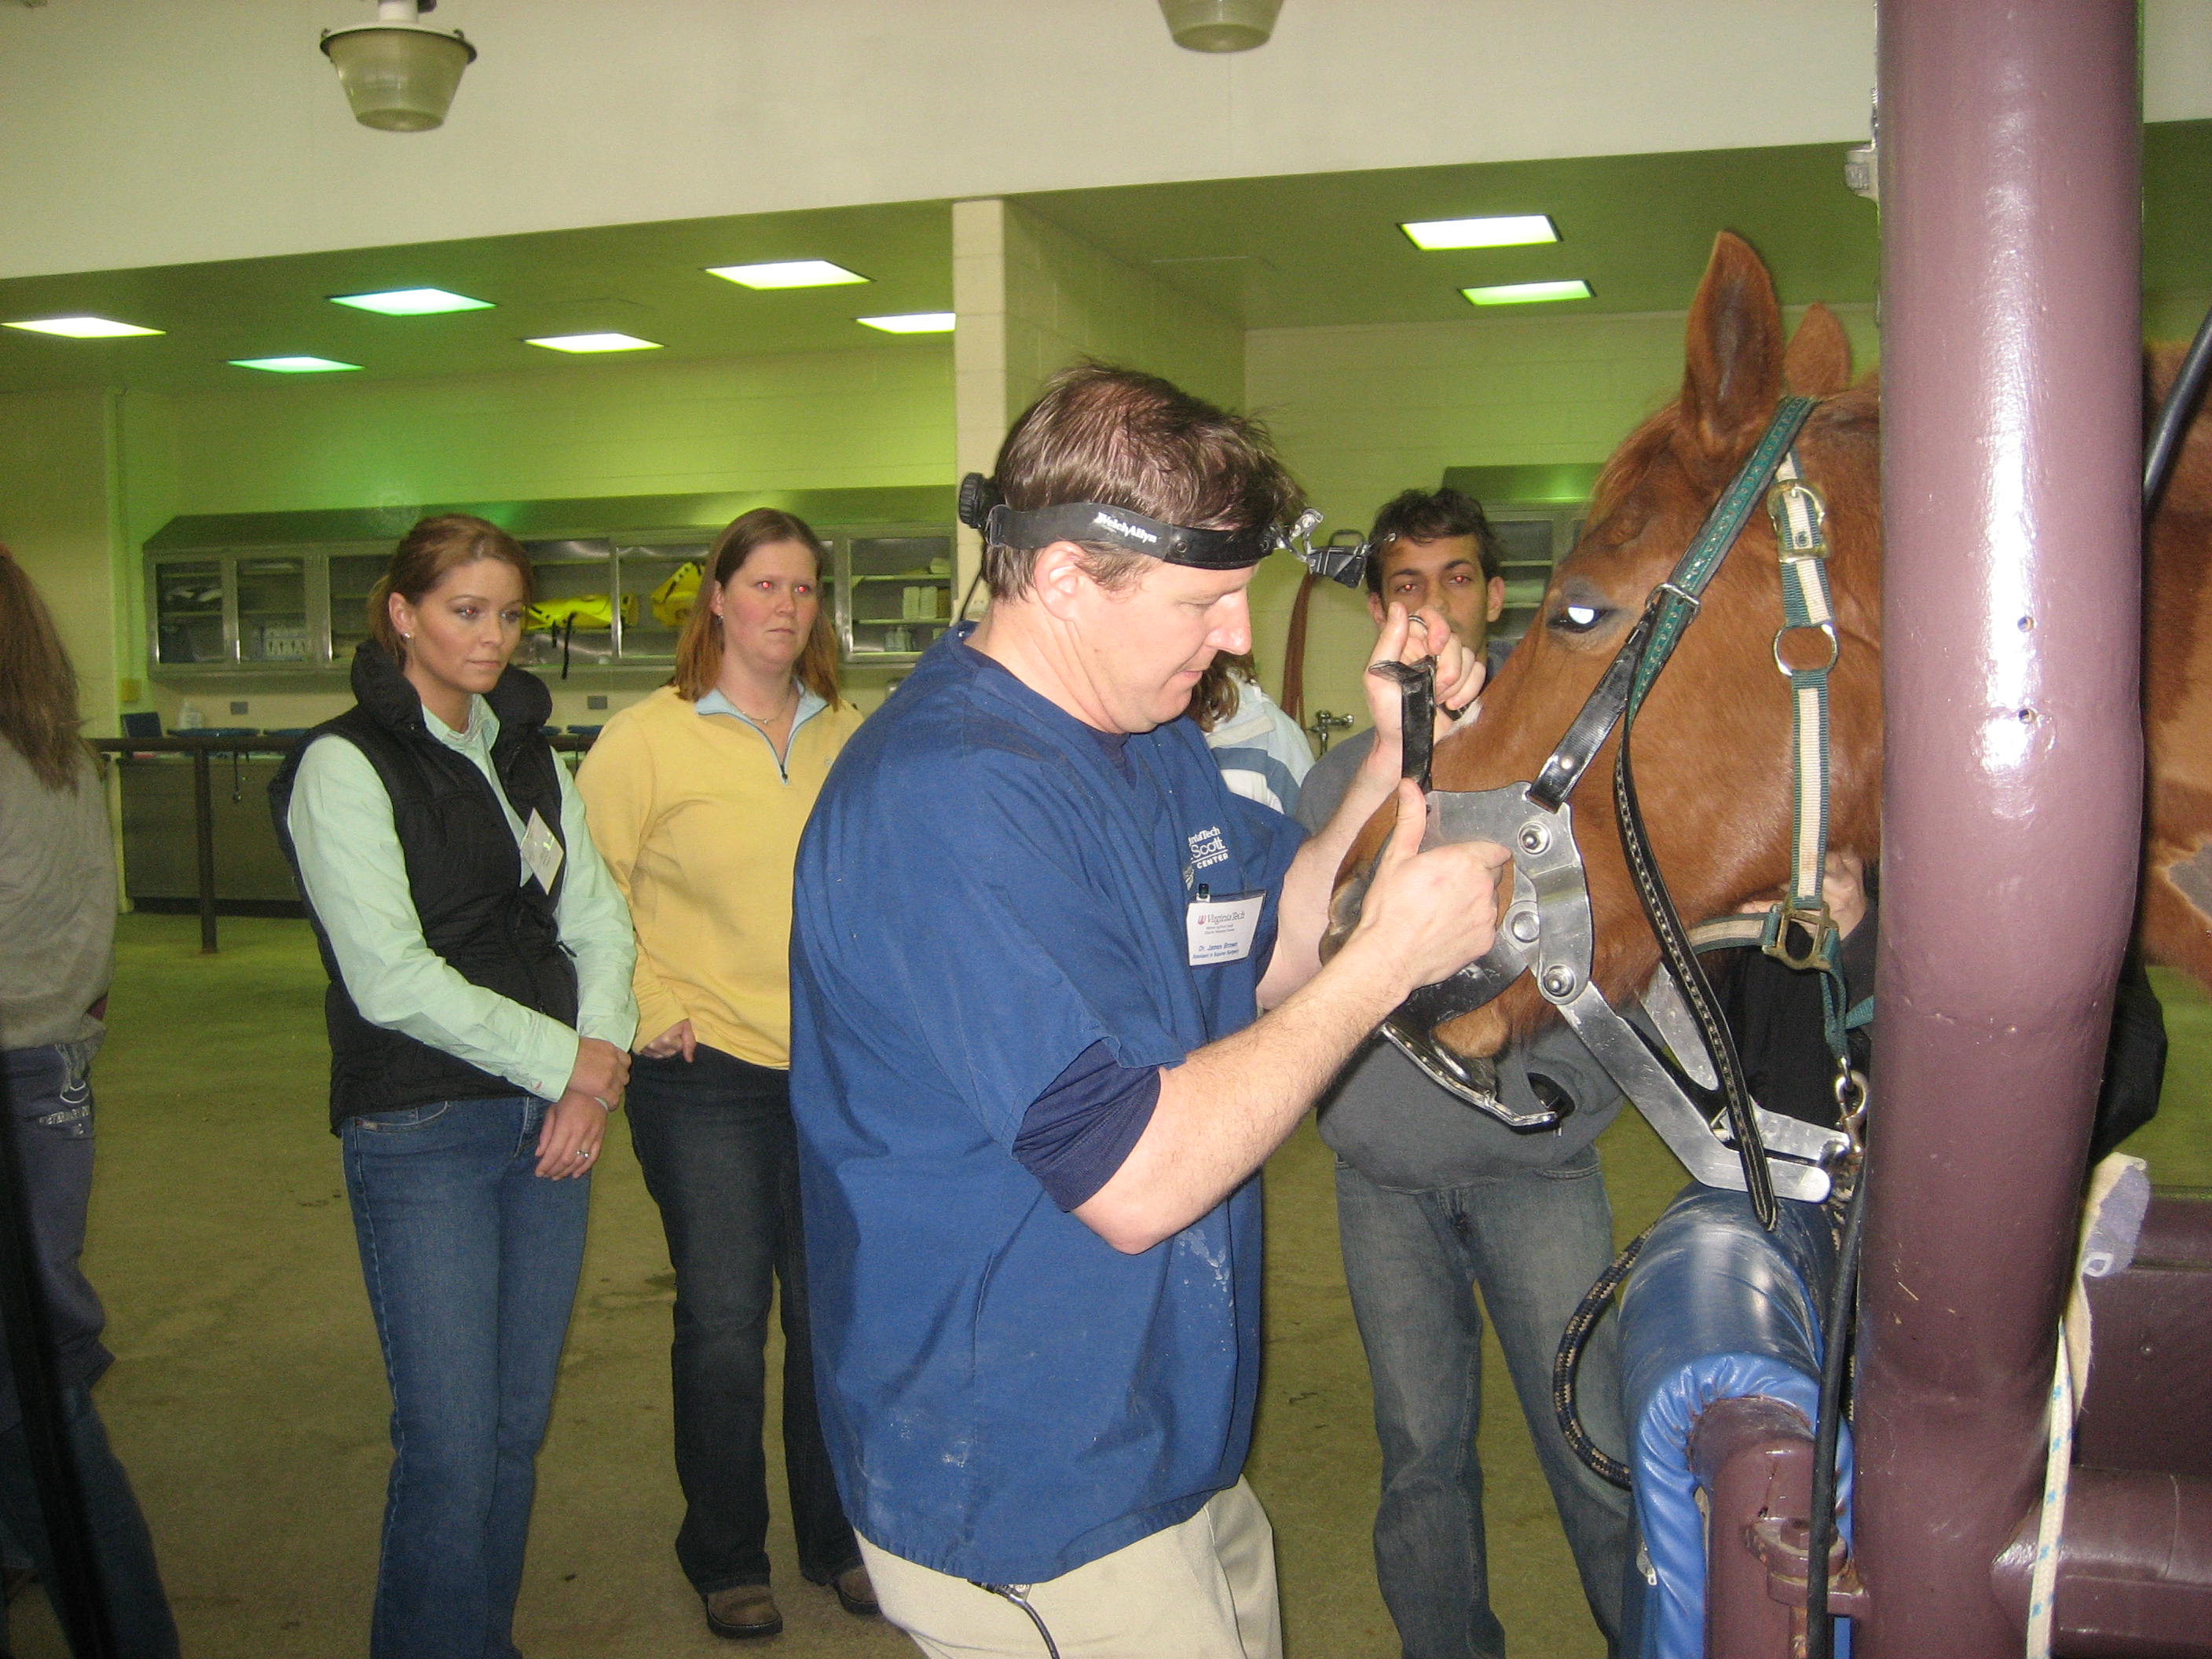 Veterinary technicians attend the wet lab on dentistry presented by Dr. James Brown.